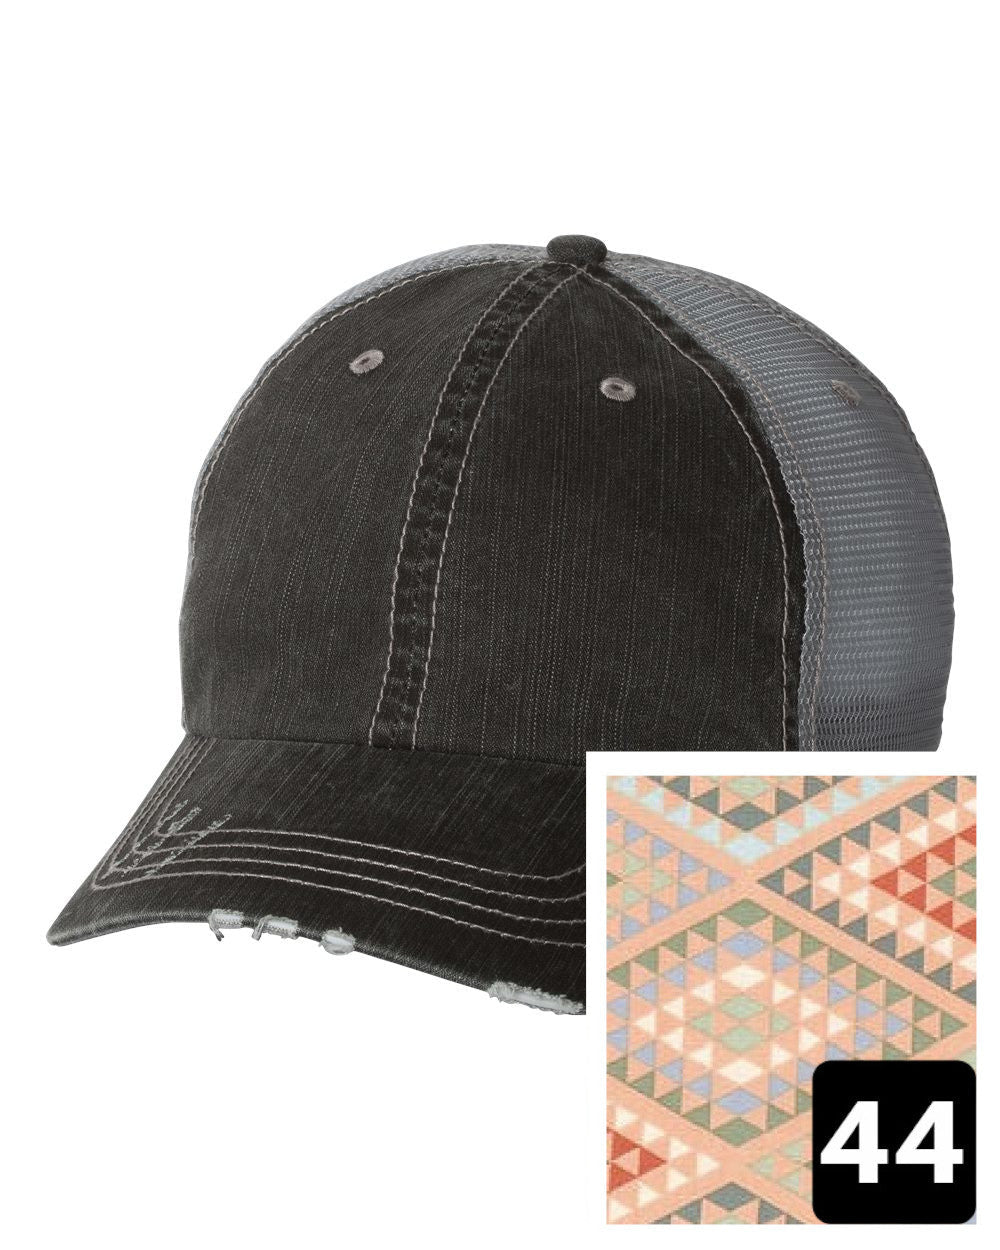 gray distressed trucker hat with navy coral and white chevron fabric state of Illinois